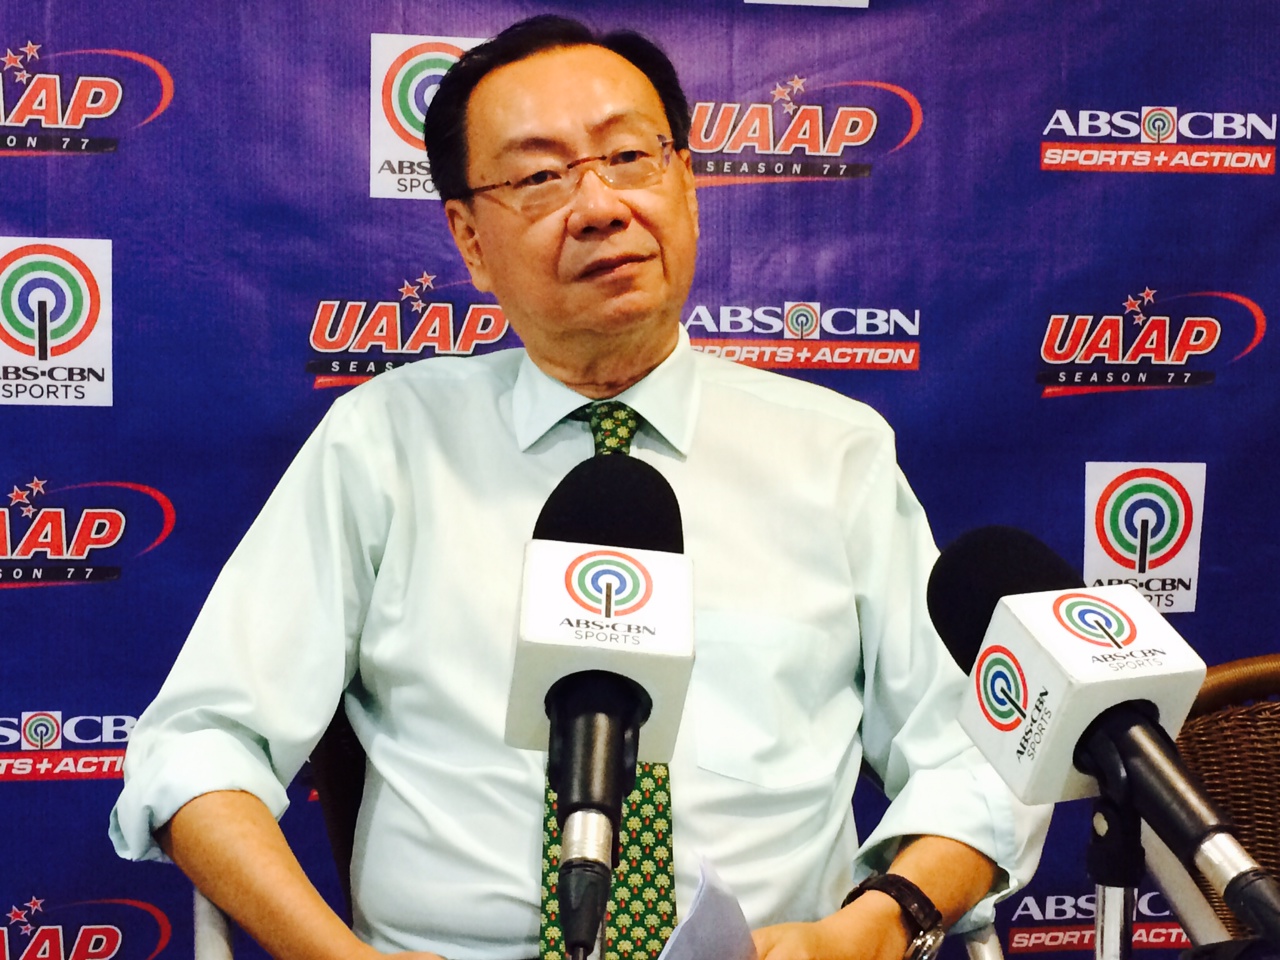 UAAP Commissioner Andy Jao on Tuesday upheld Ateneo's 68-64 win over Far Eastern University last Saturday. The Tamaraws placed that game under protest on Monday before it was junked by Jao. Mark Giongco 